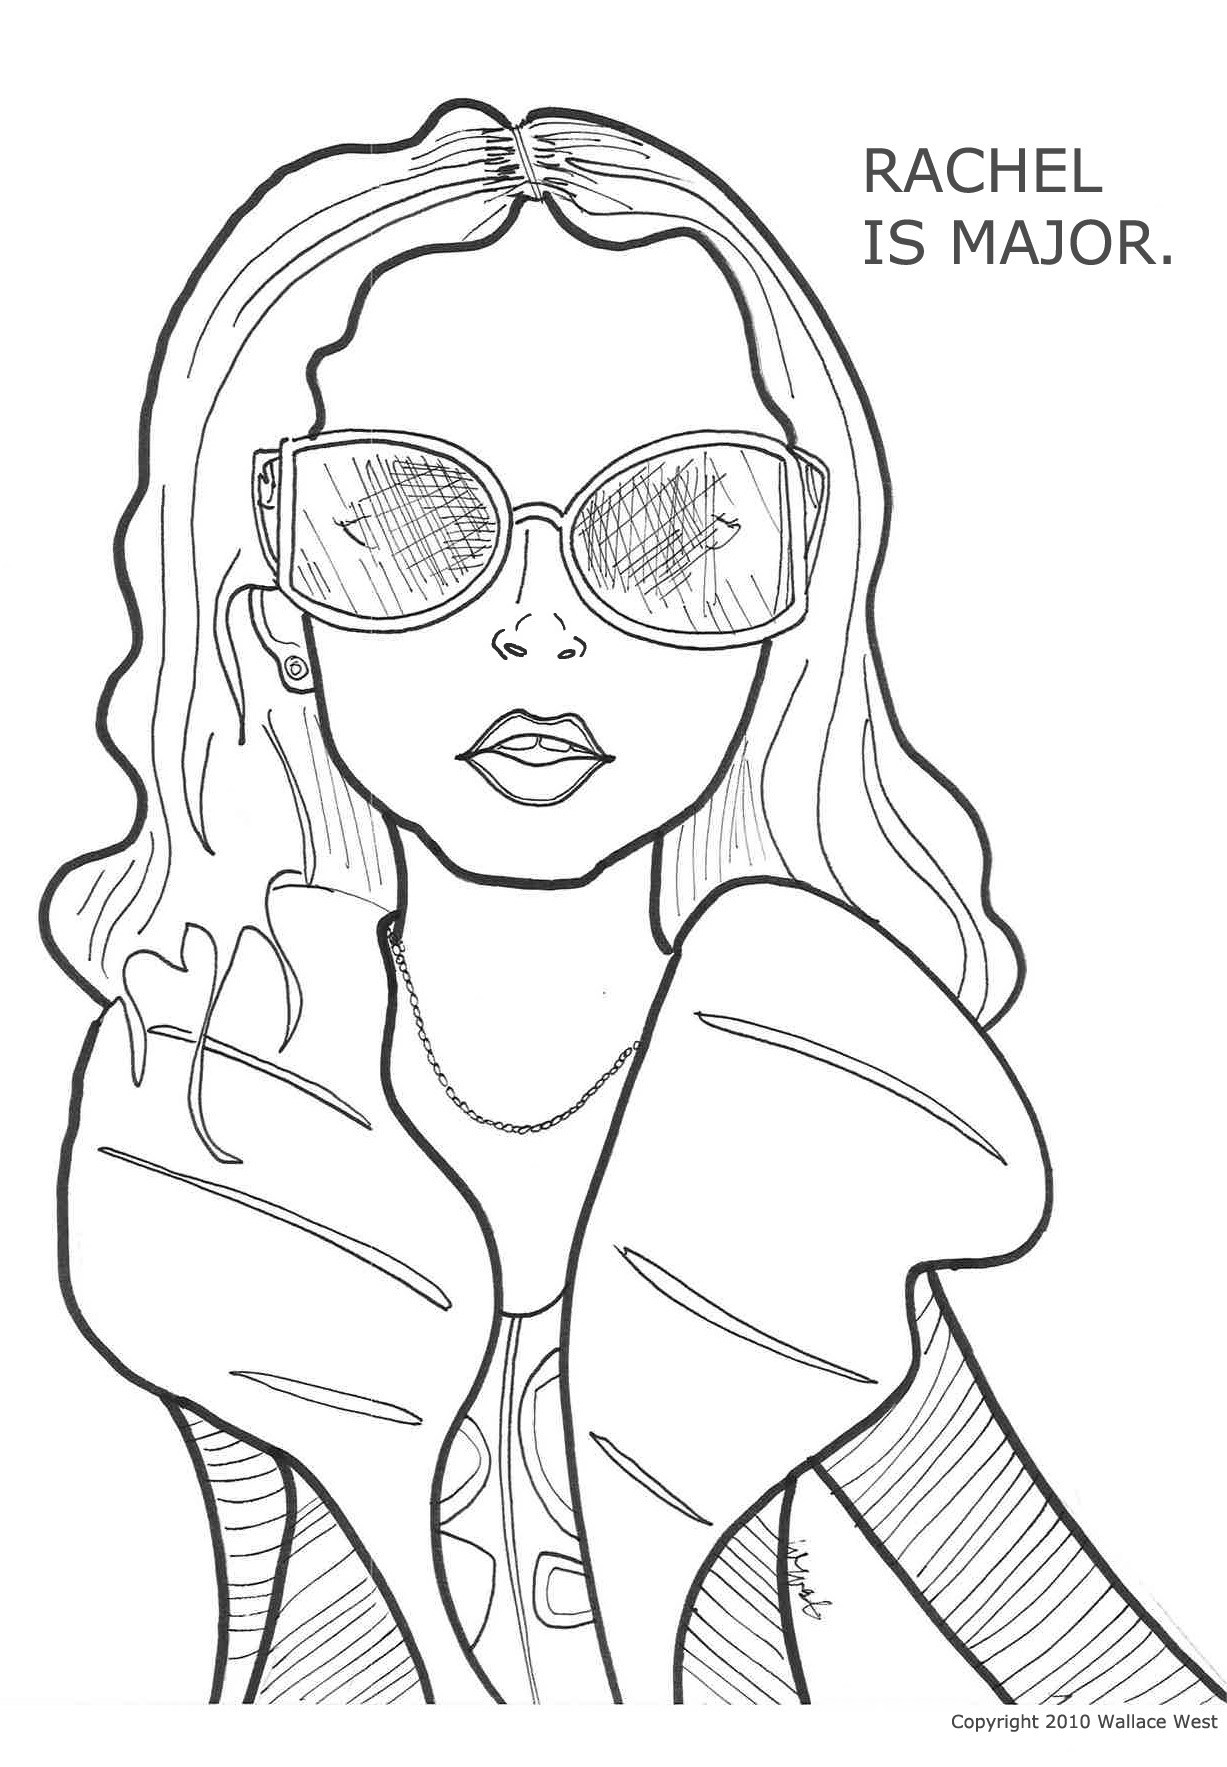 Fashion Coloring Pages For Girls
 FASHION IS FREE FASHION WEEK COLORING PAGES